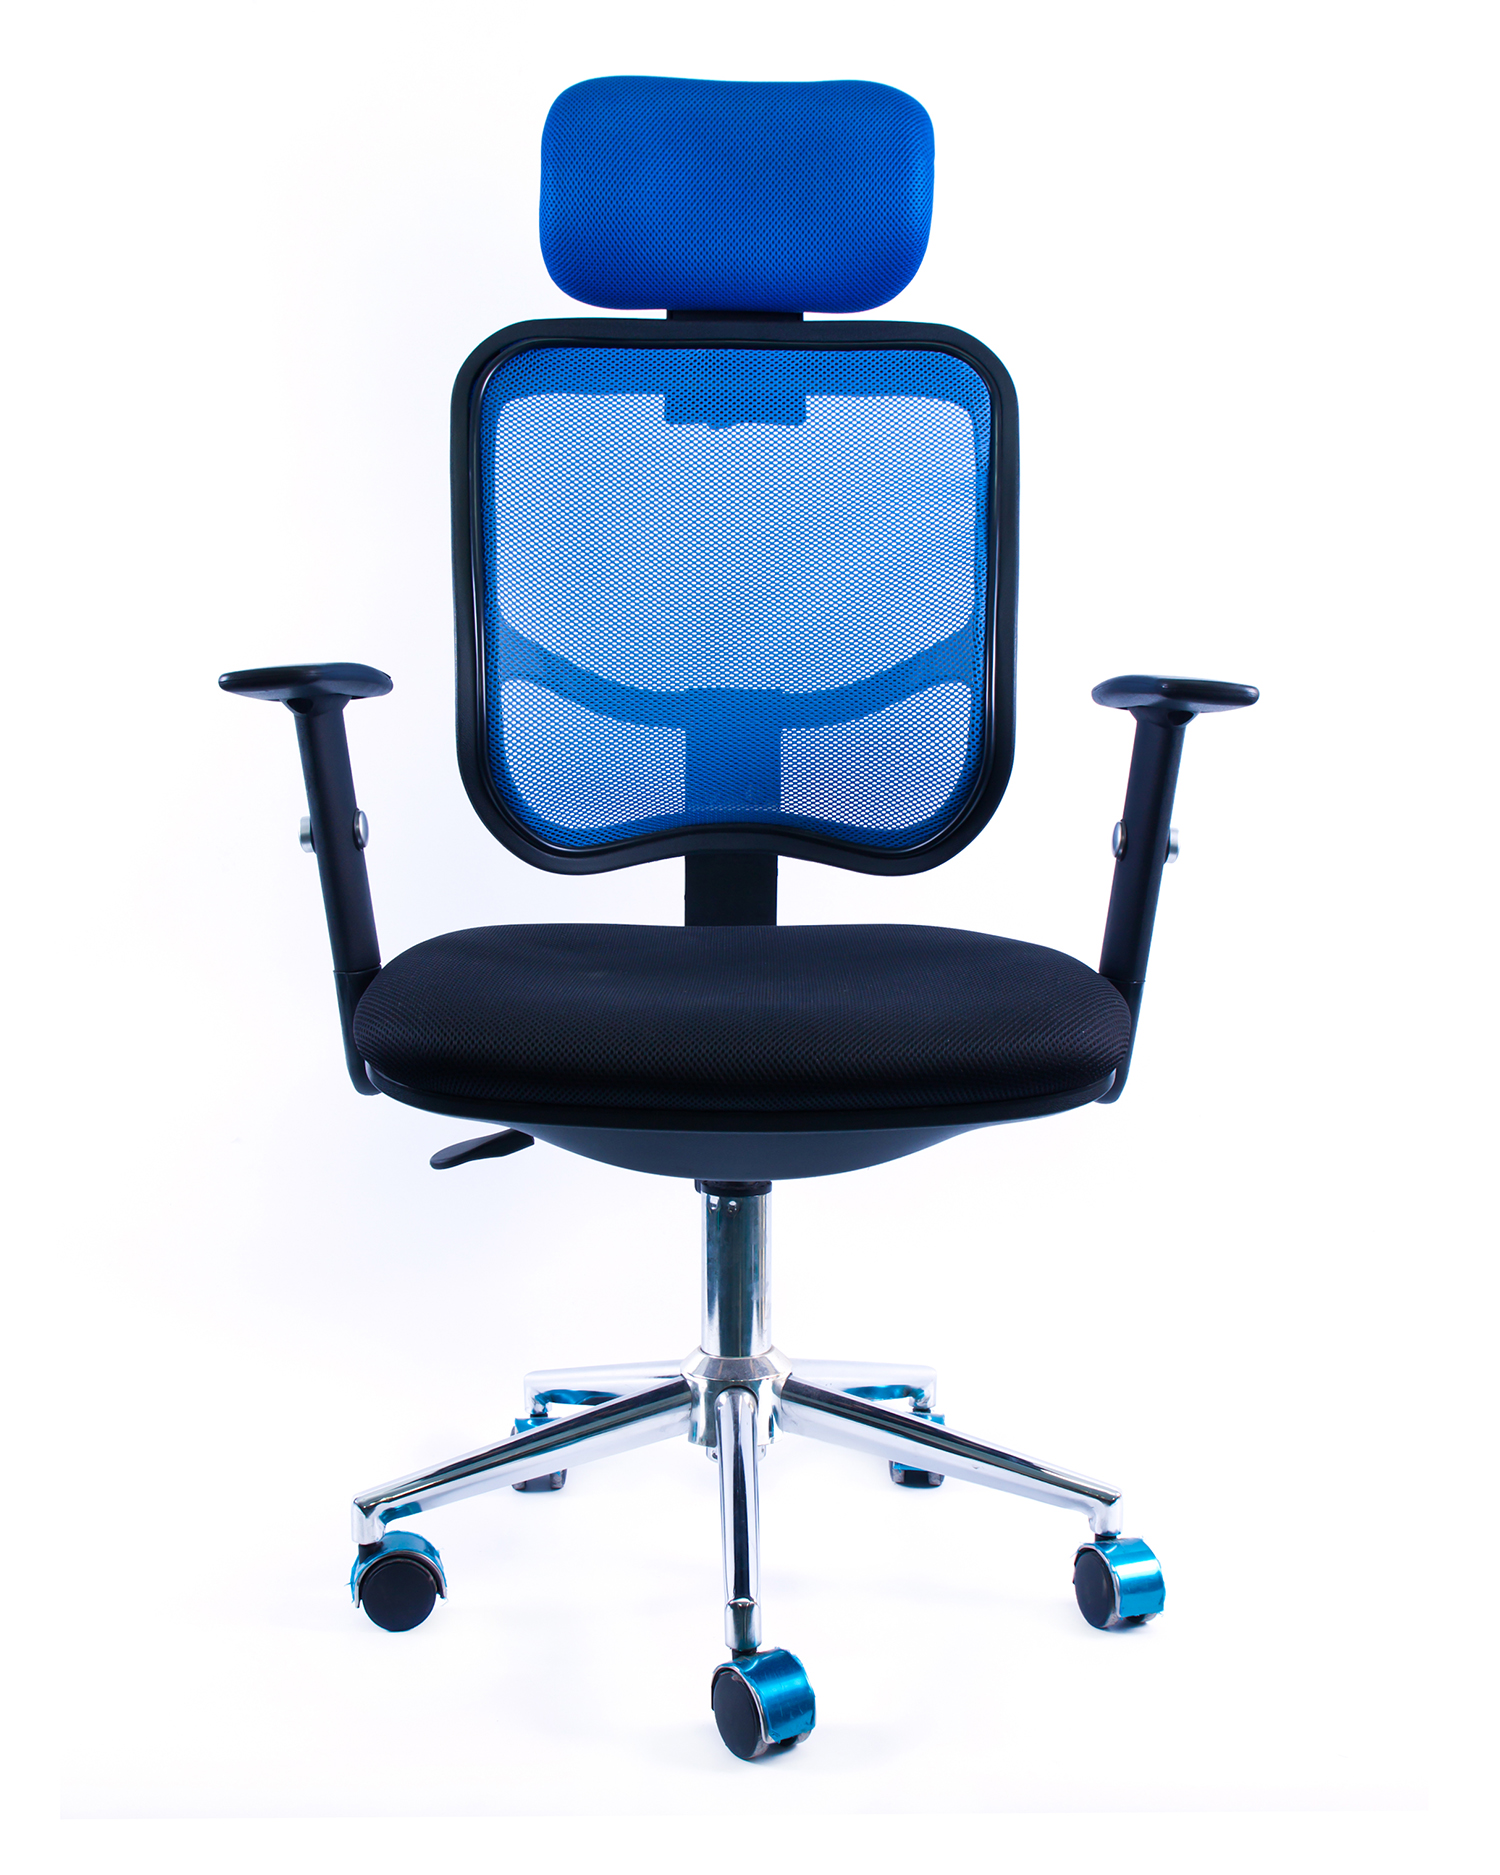 Demo product furniture office chair blue, modern cross selling